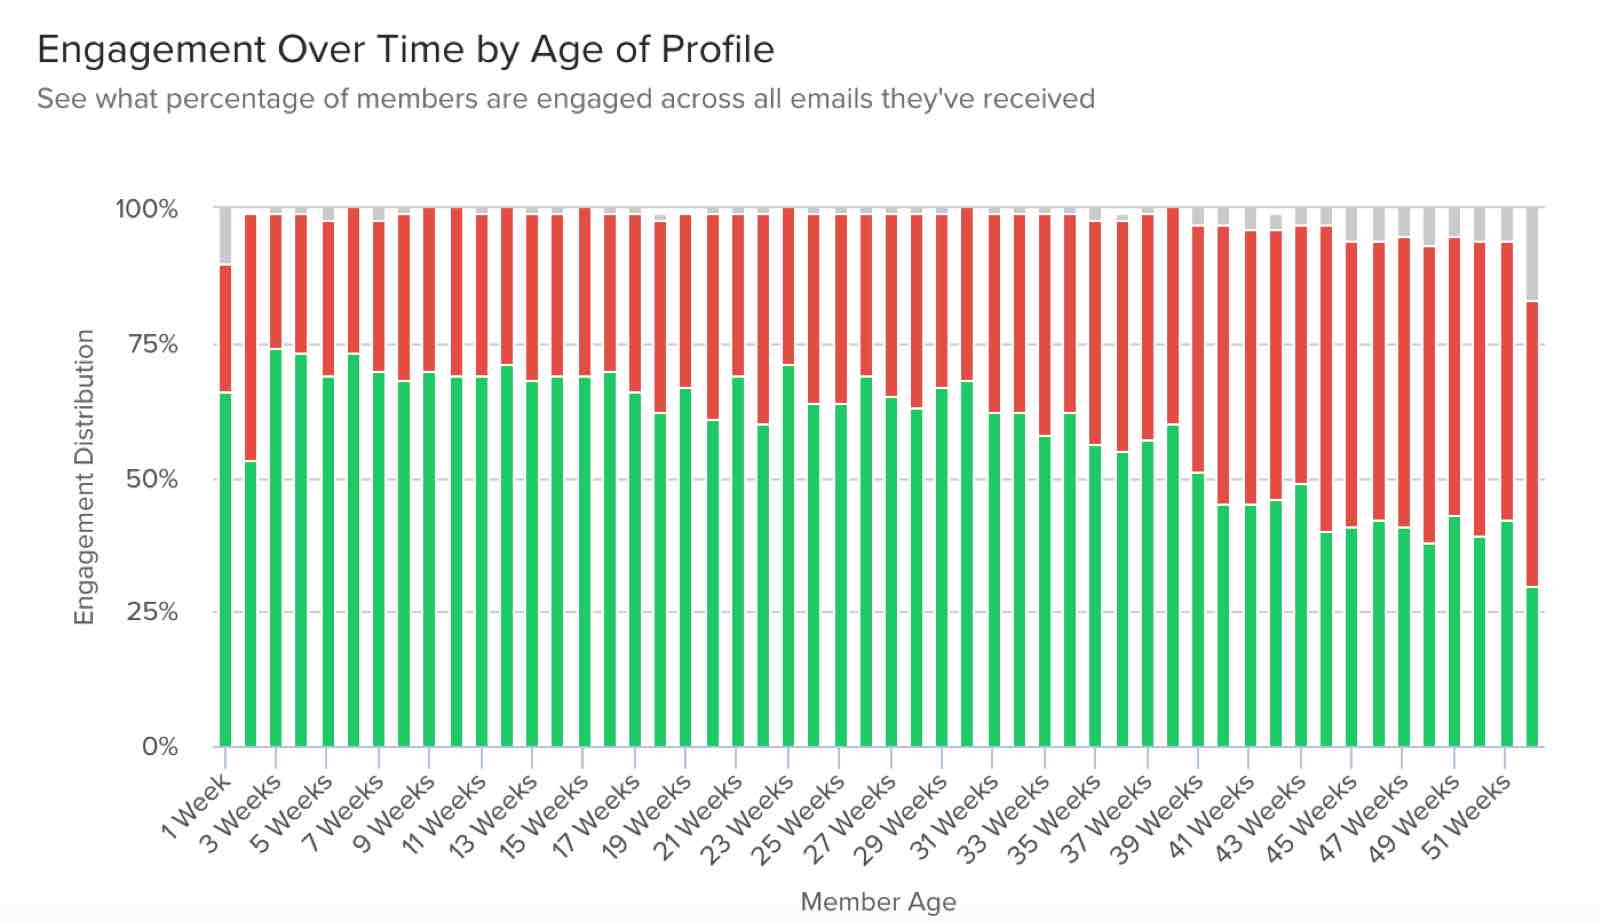 Engagement based on a profile's age